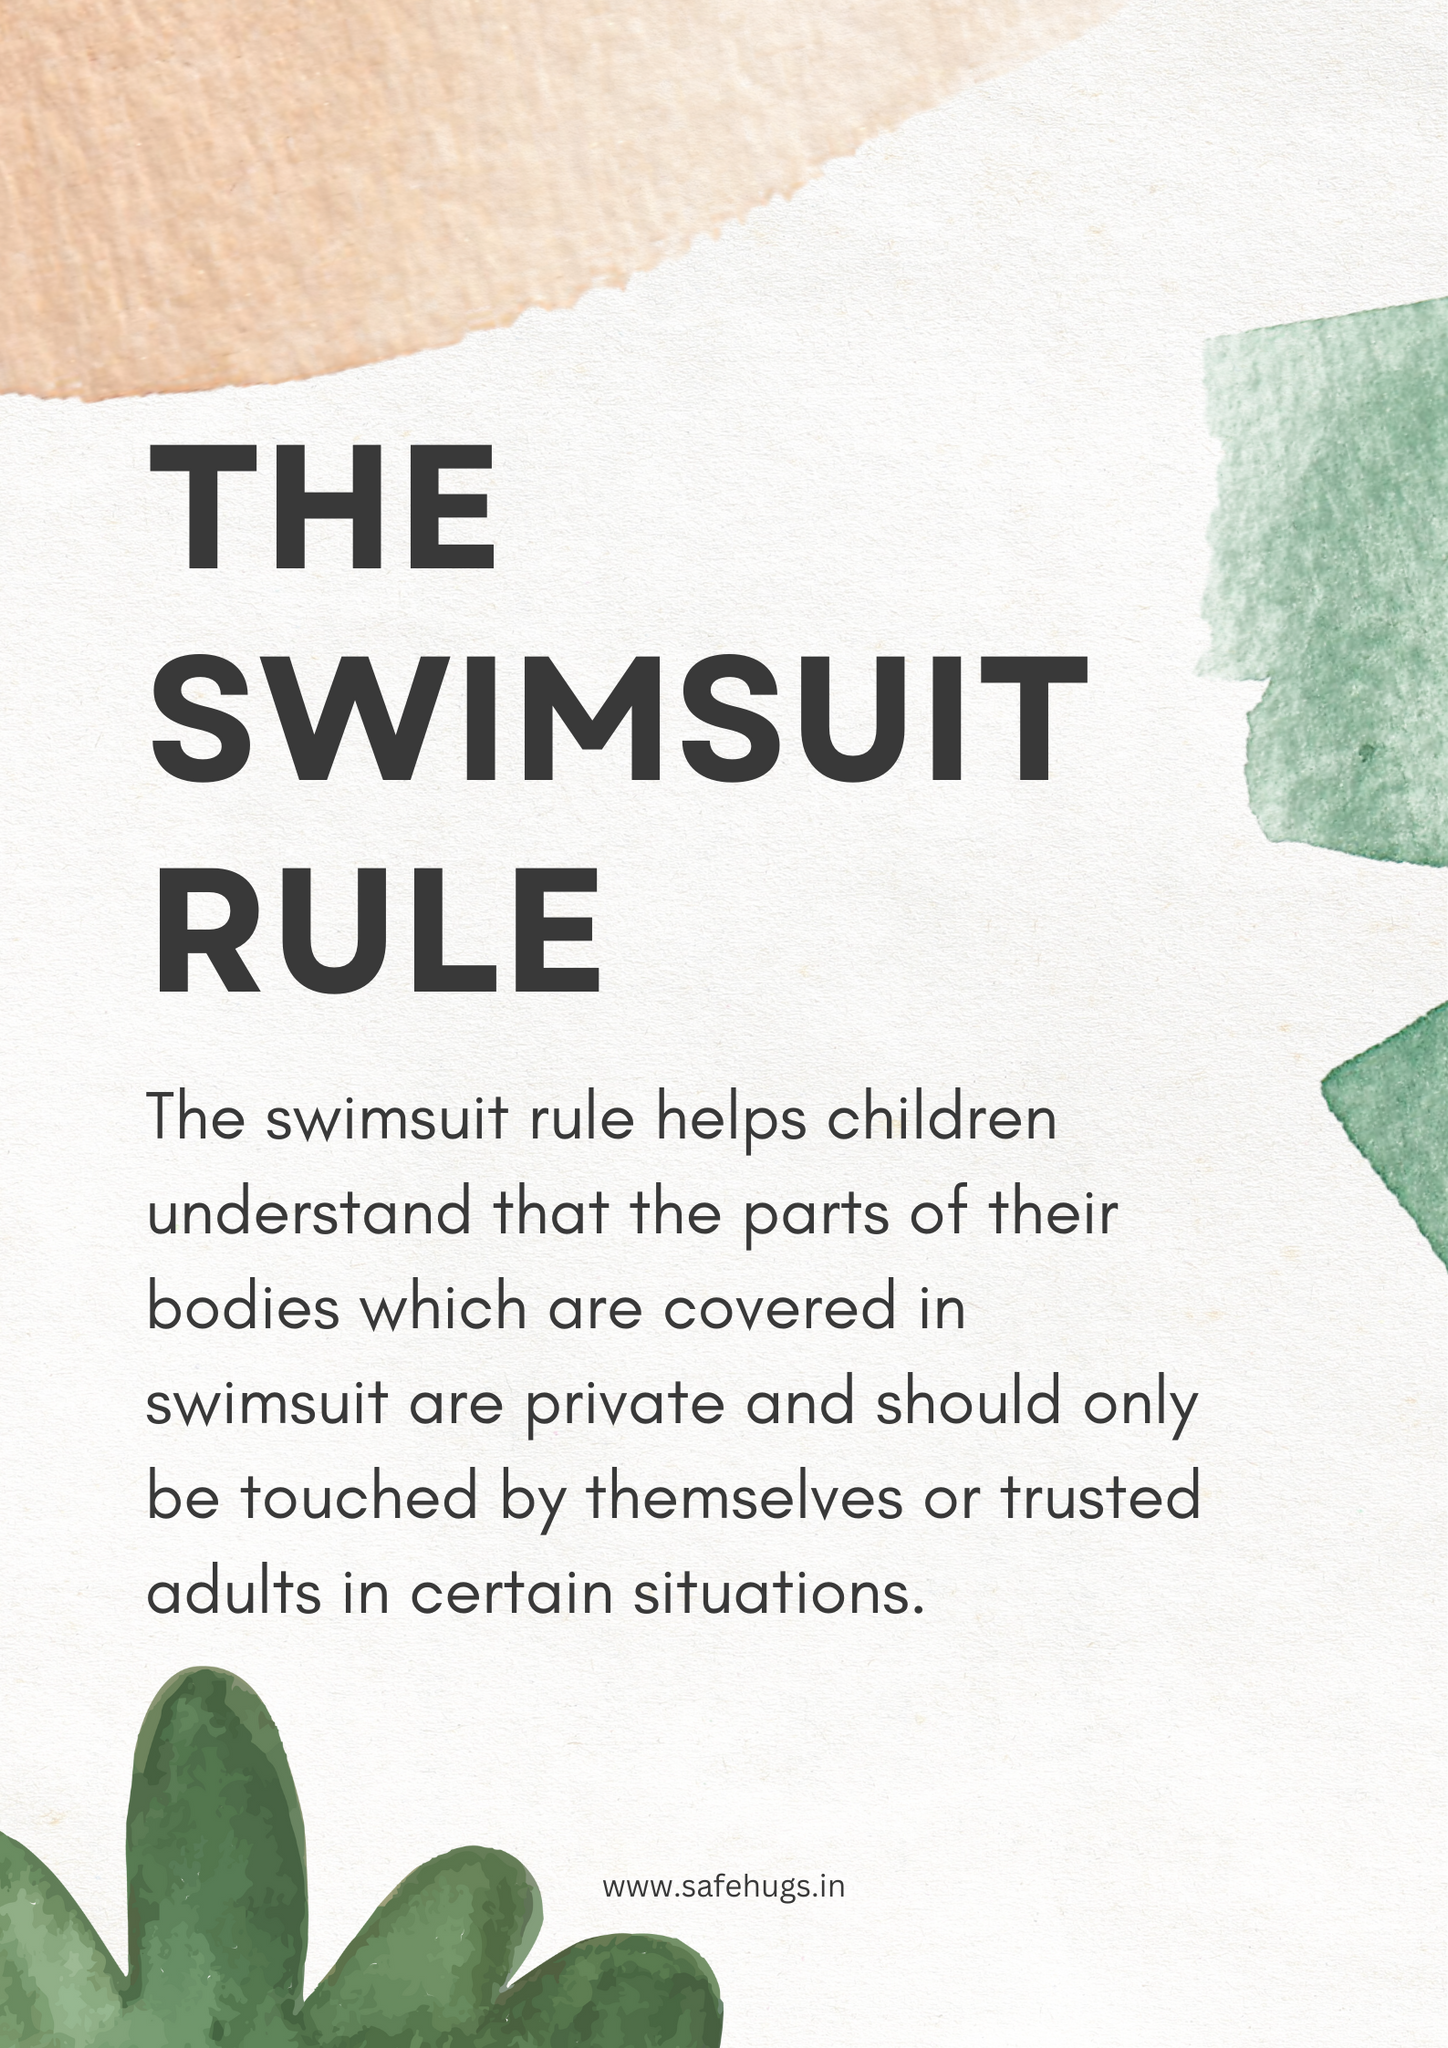 The swimsuit rule